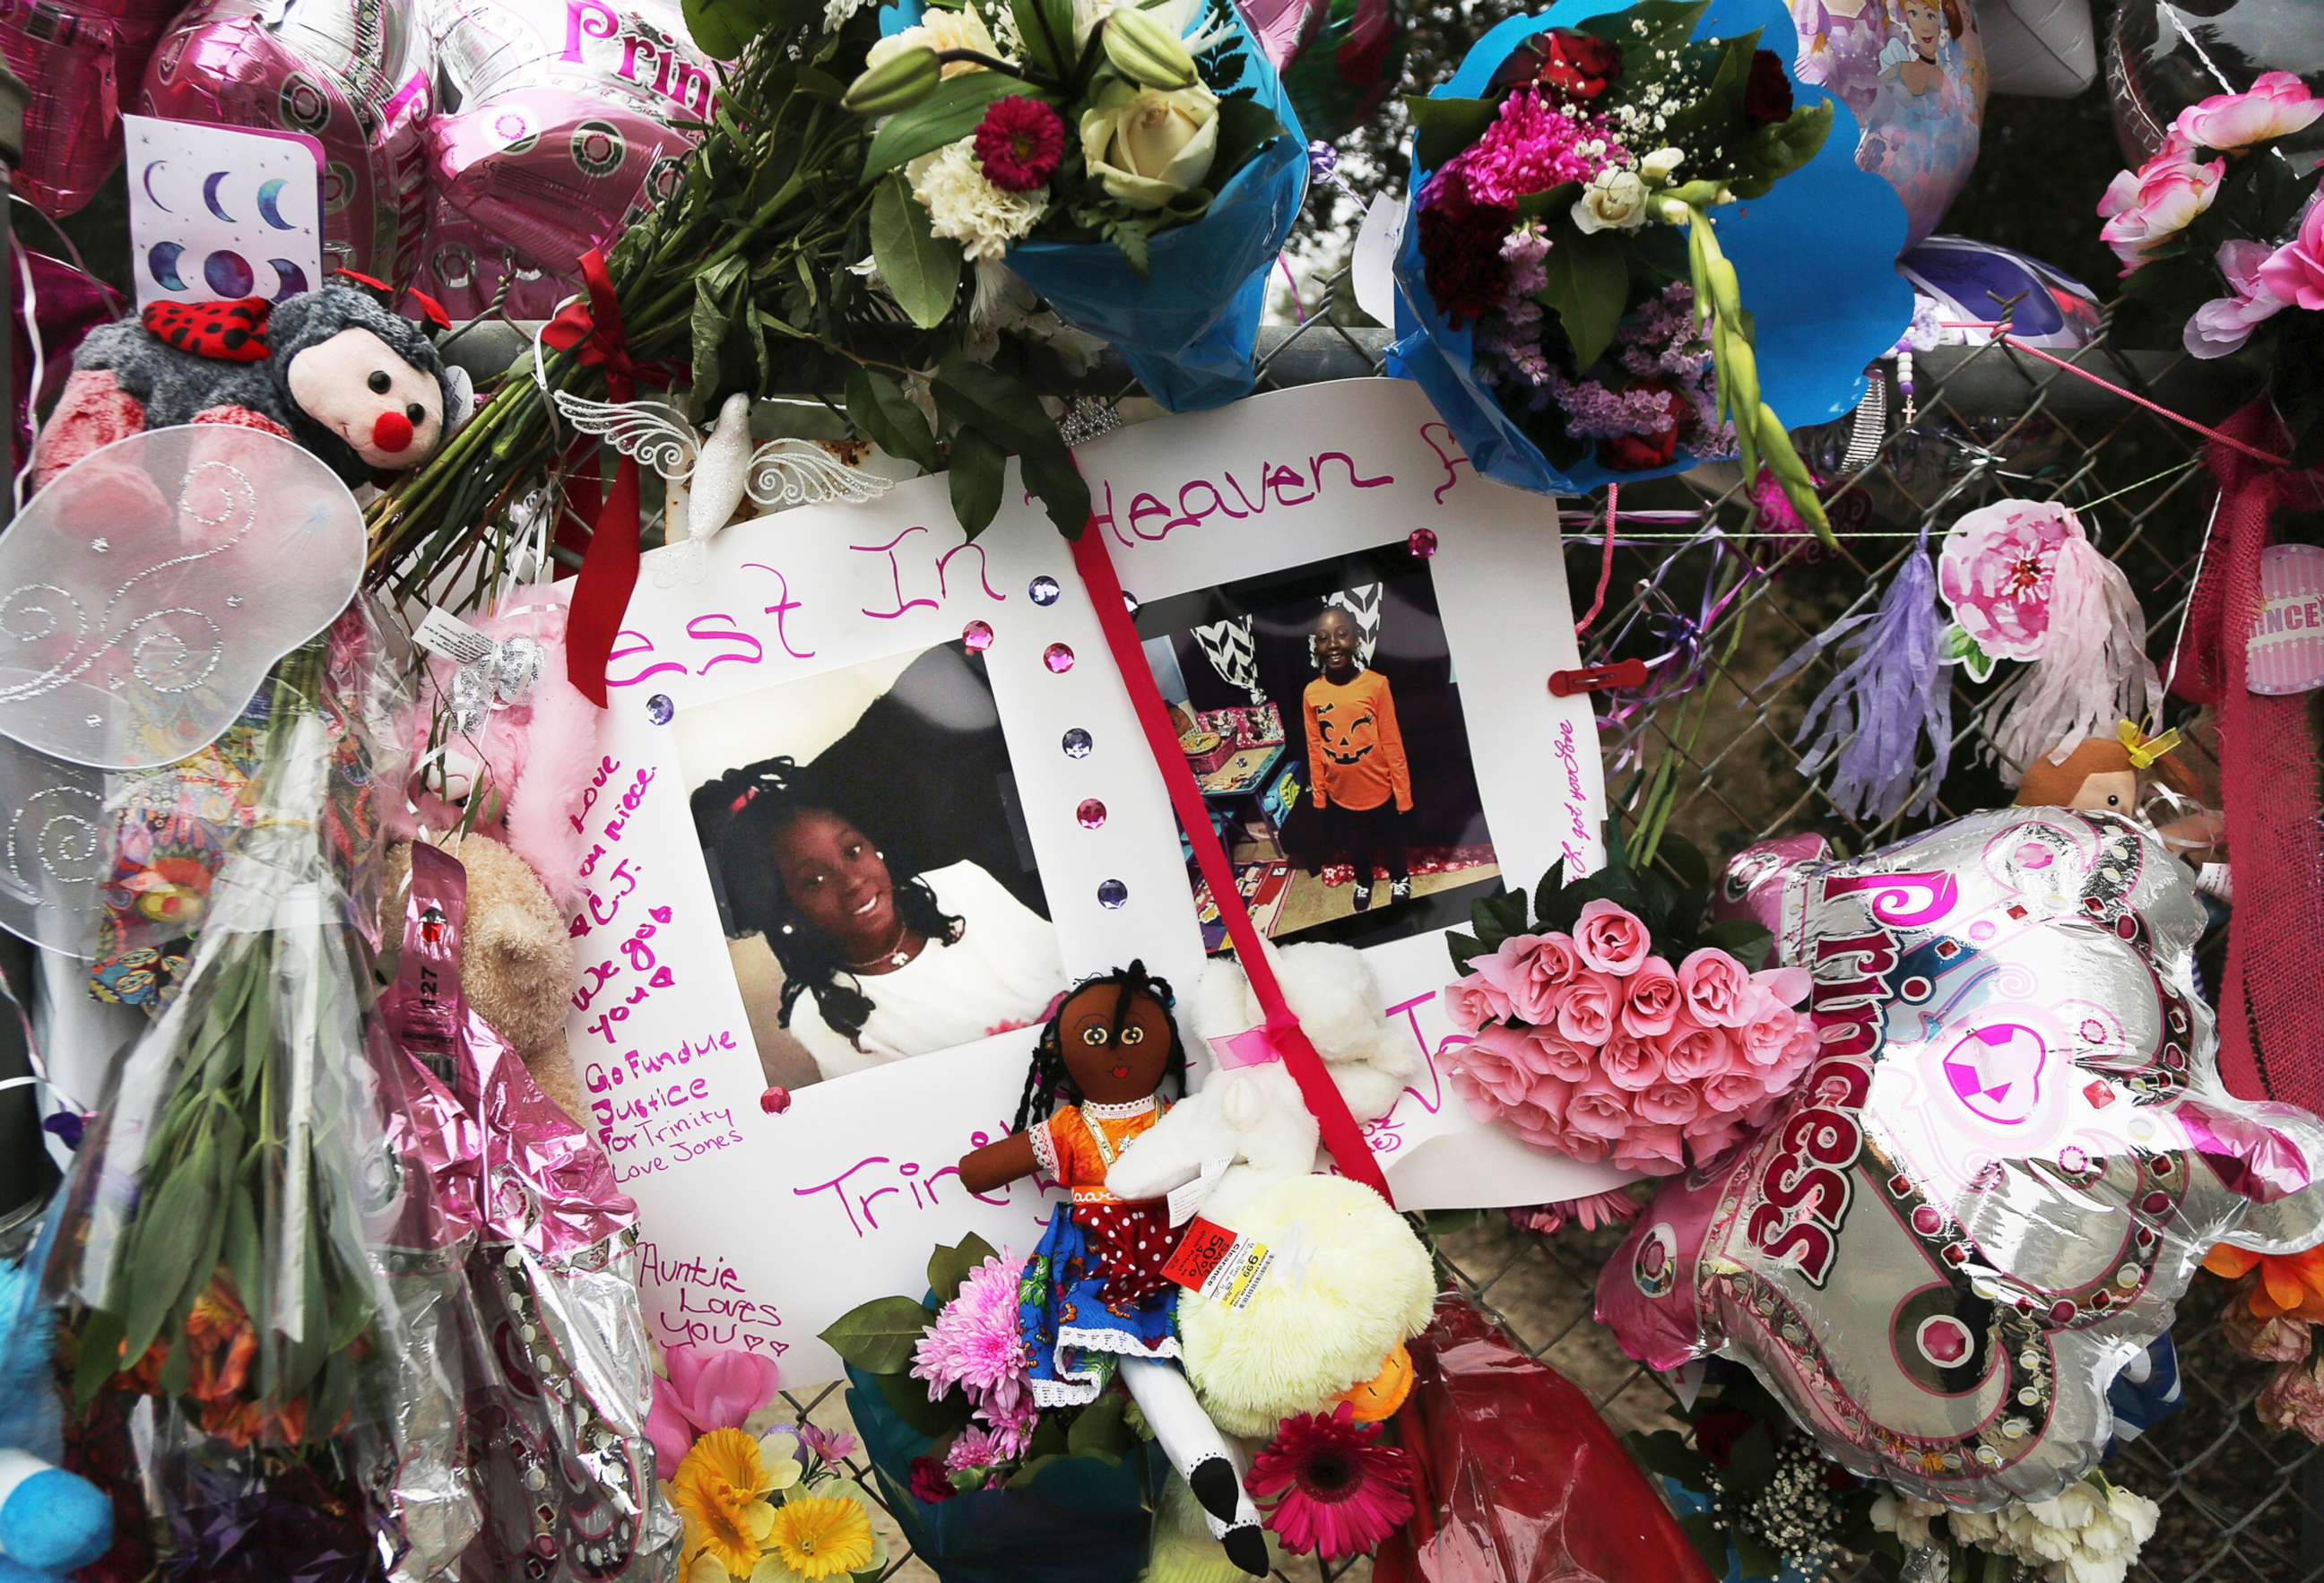 PHOTO: Dozens of tributes at a large memorial to Trinity Love Jones, a 9-year-old girl whose body was found in a duffel bag along a suburban Los Angeles equestrian trail, in Hacienda Heights, Calif, March 11, 2019 in this file photo.